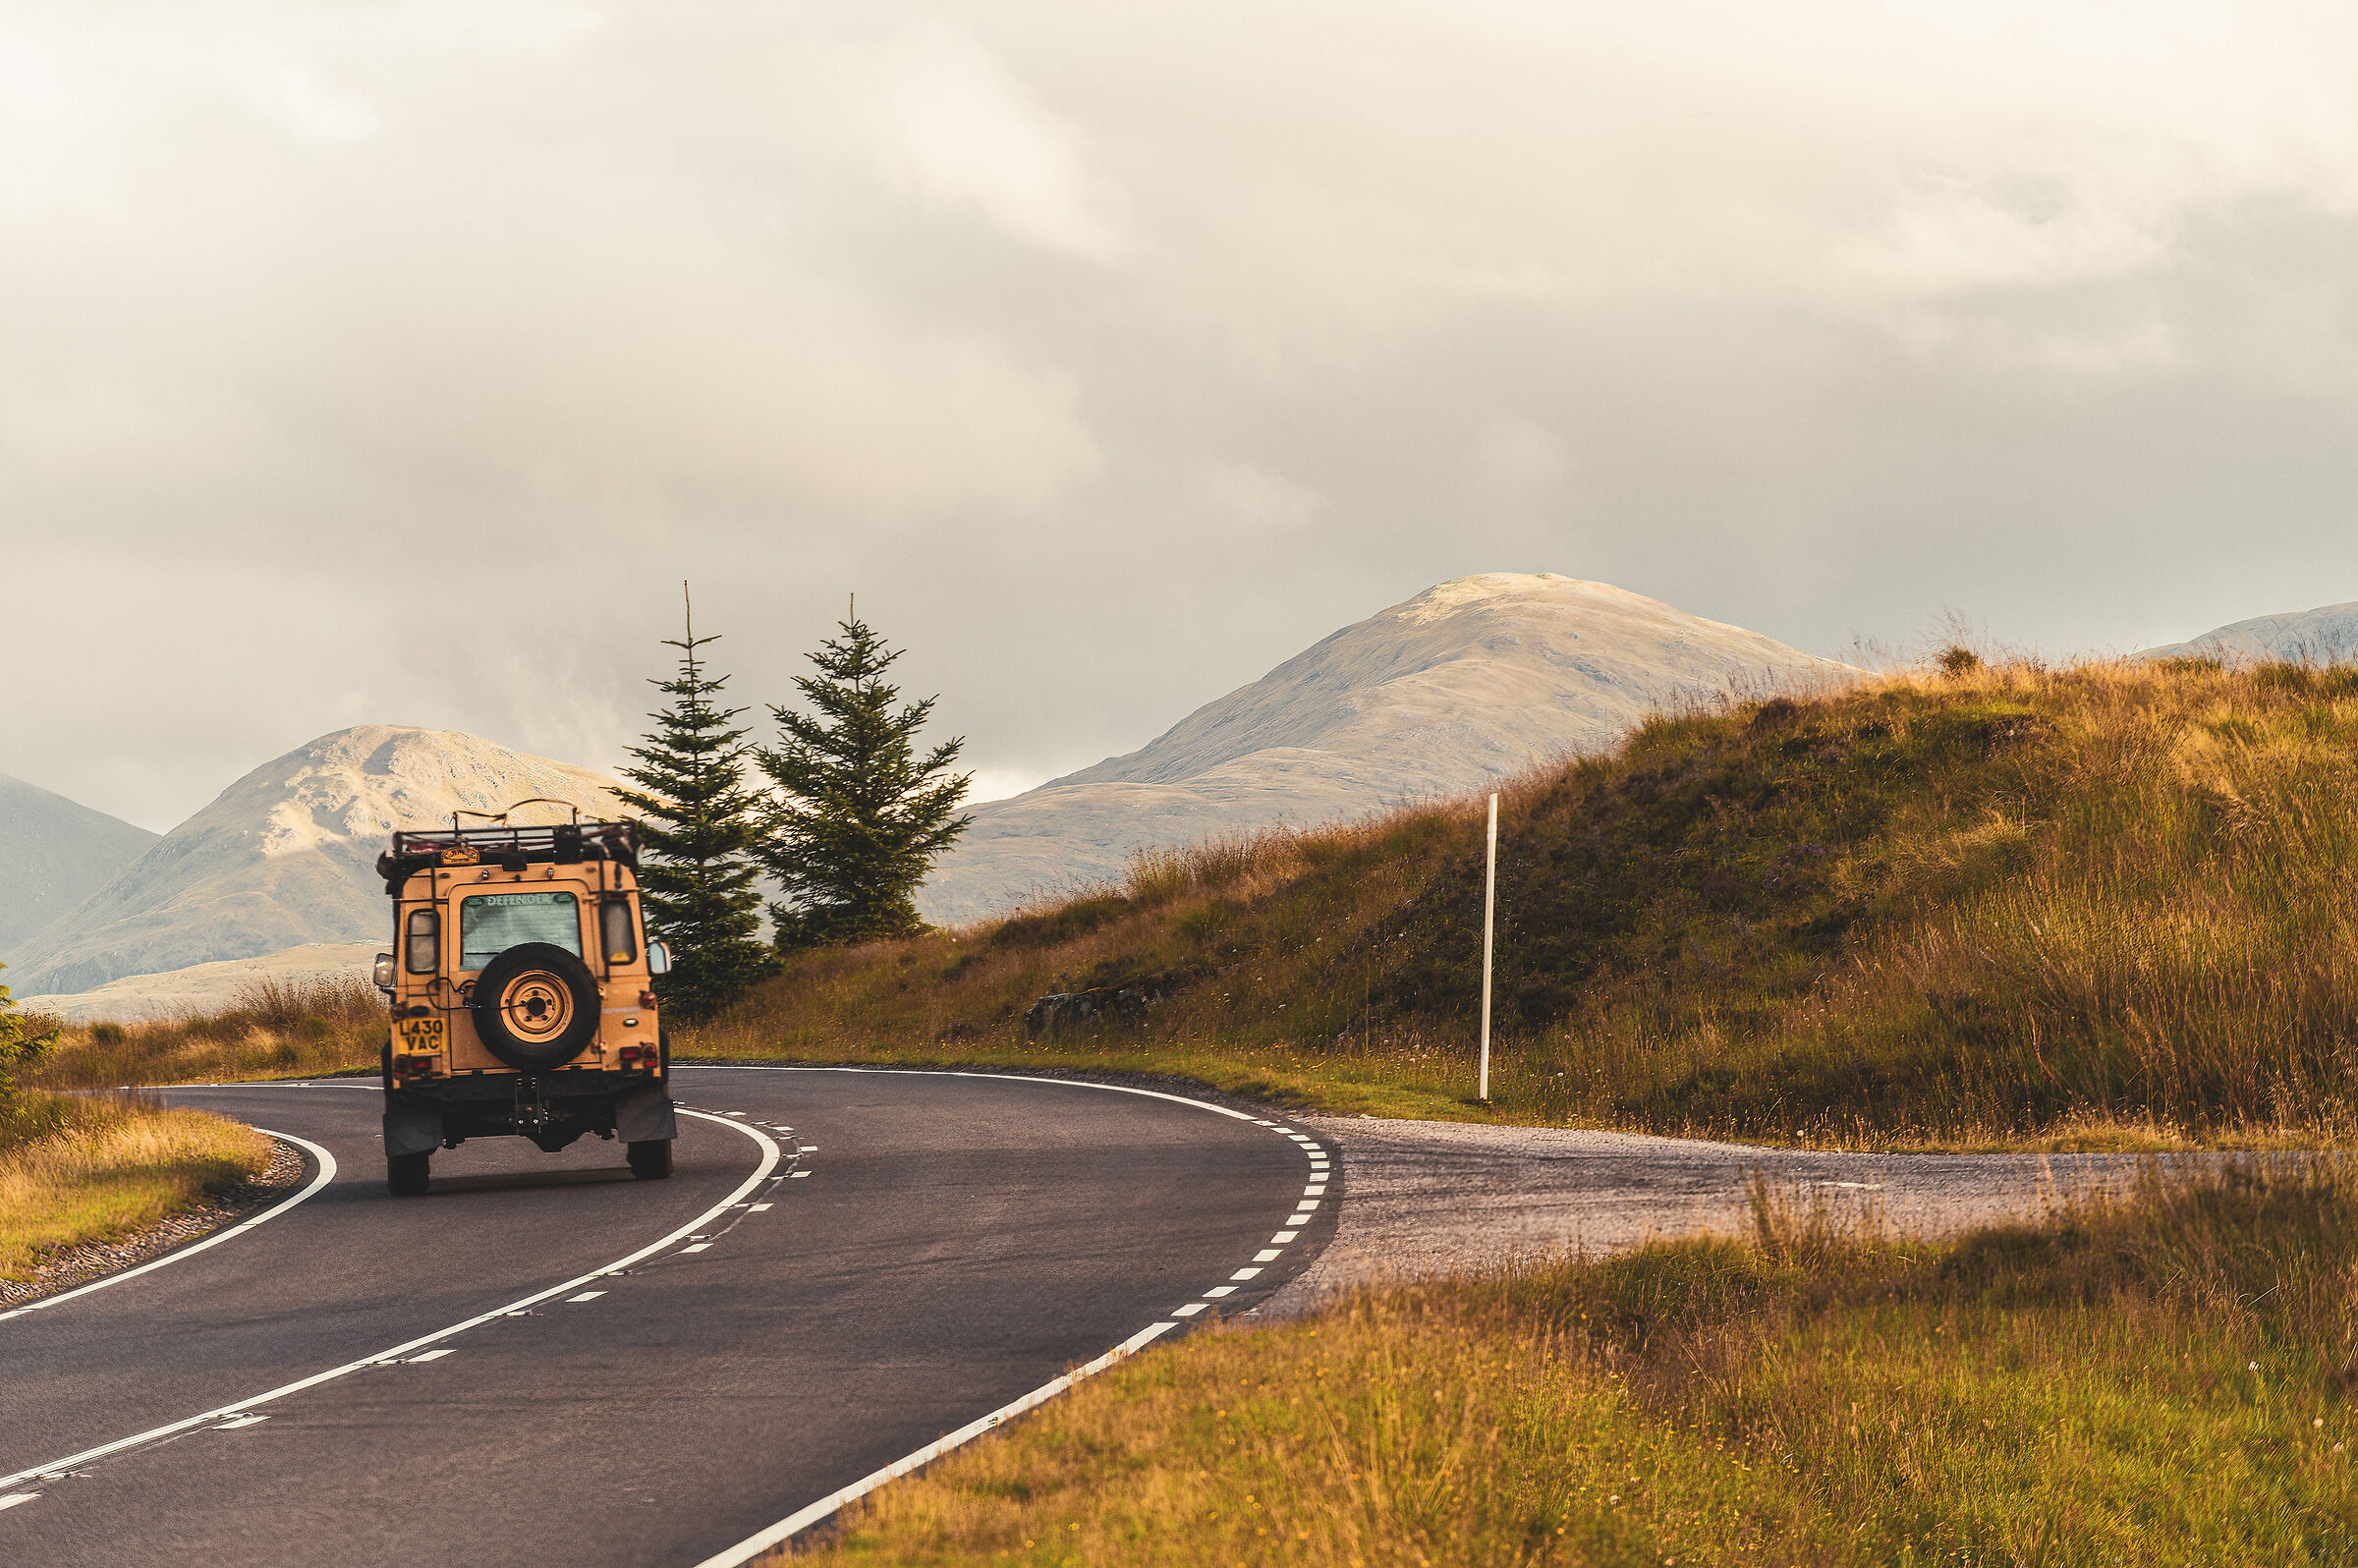 Road trip in the Scottish Highlands...